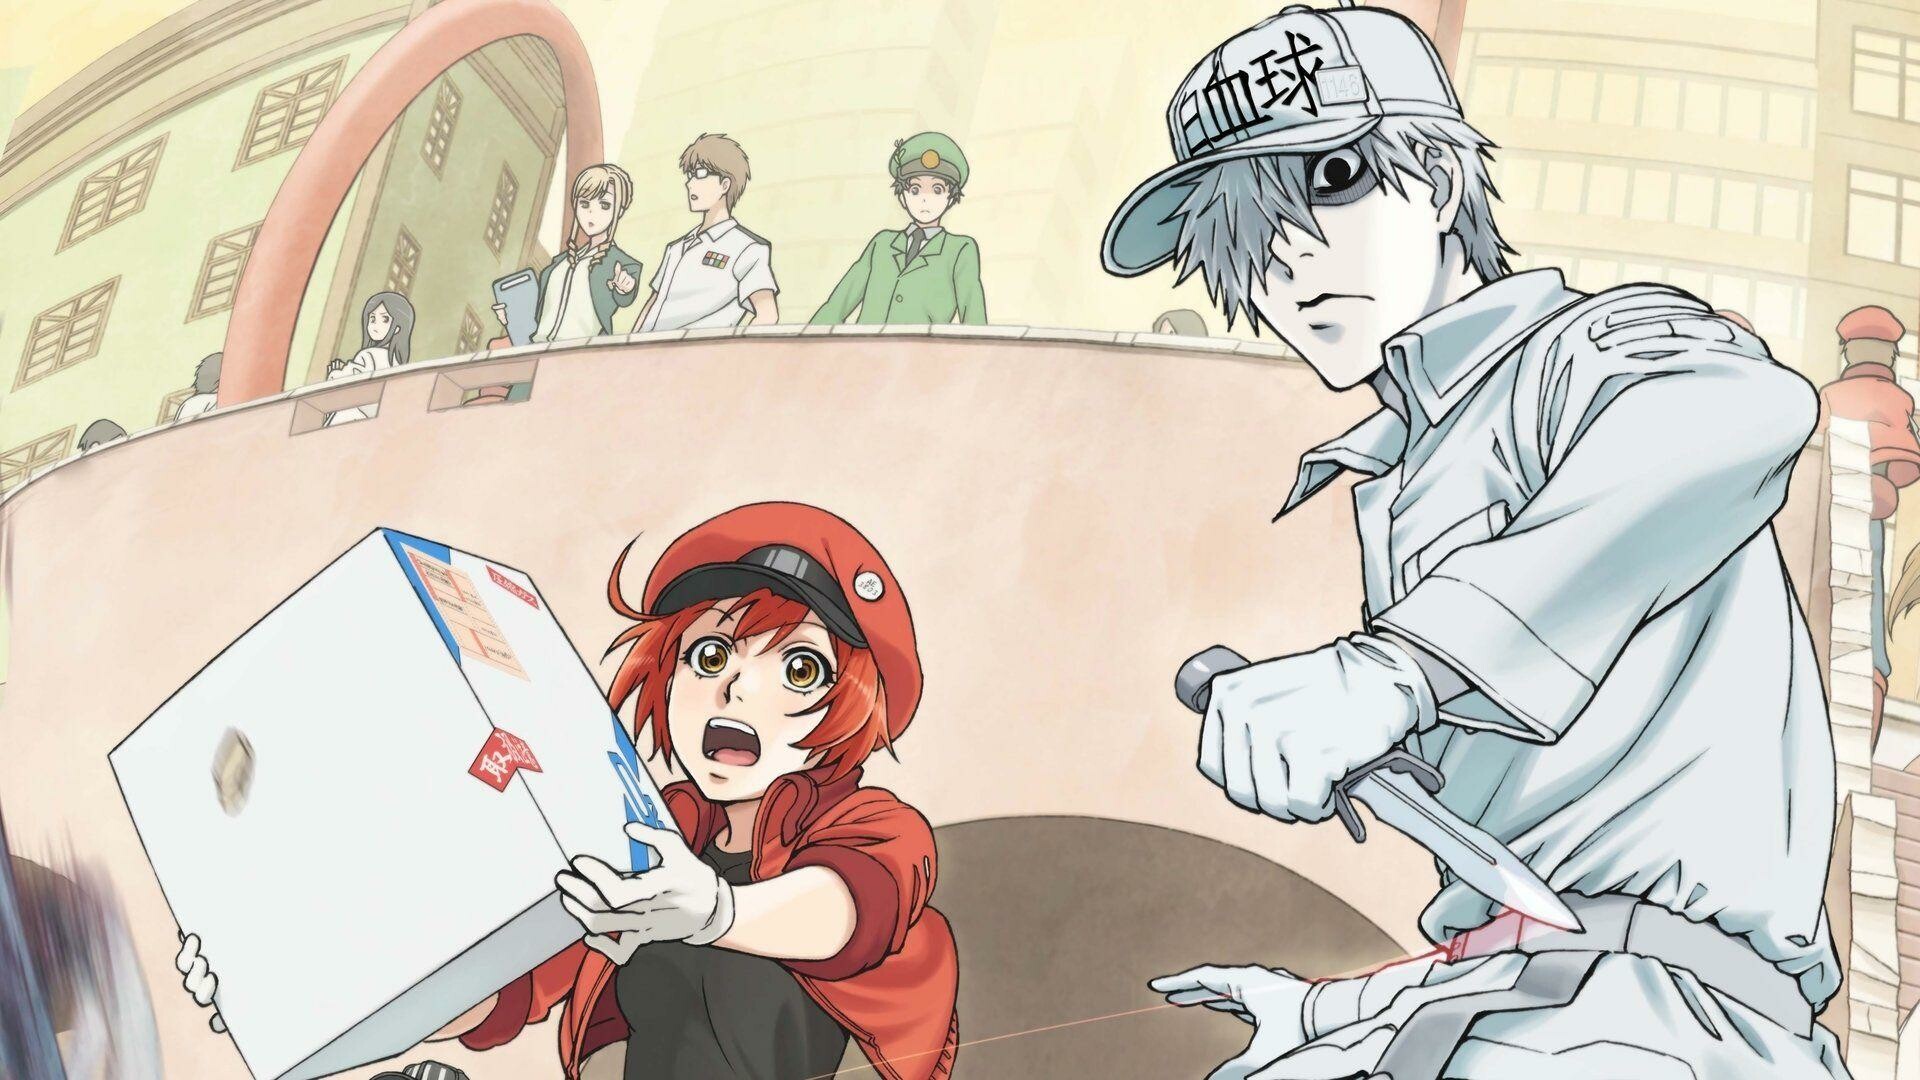 Cells at Work! Code Black: Fire-fighting nature of the cells, Educational anime. 1920x1080 Full HD Wallpaper.